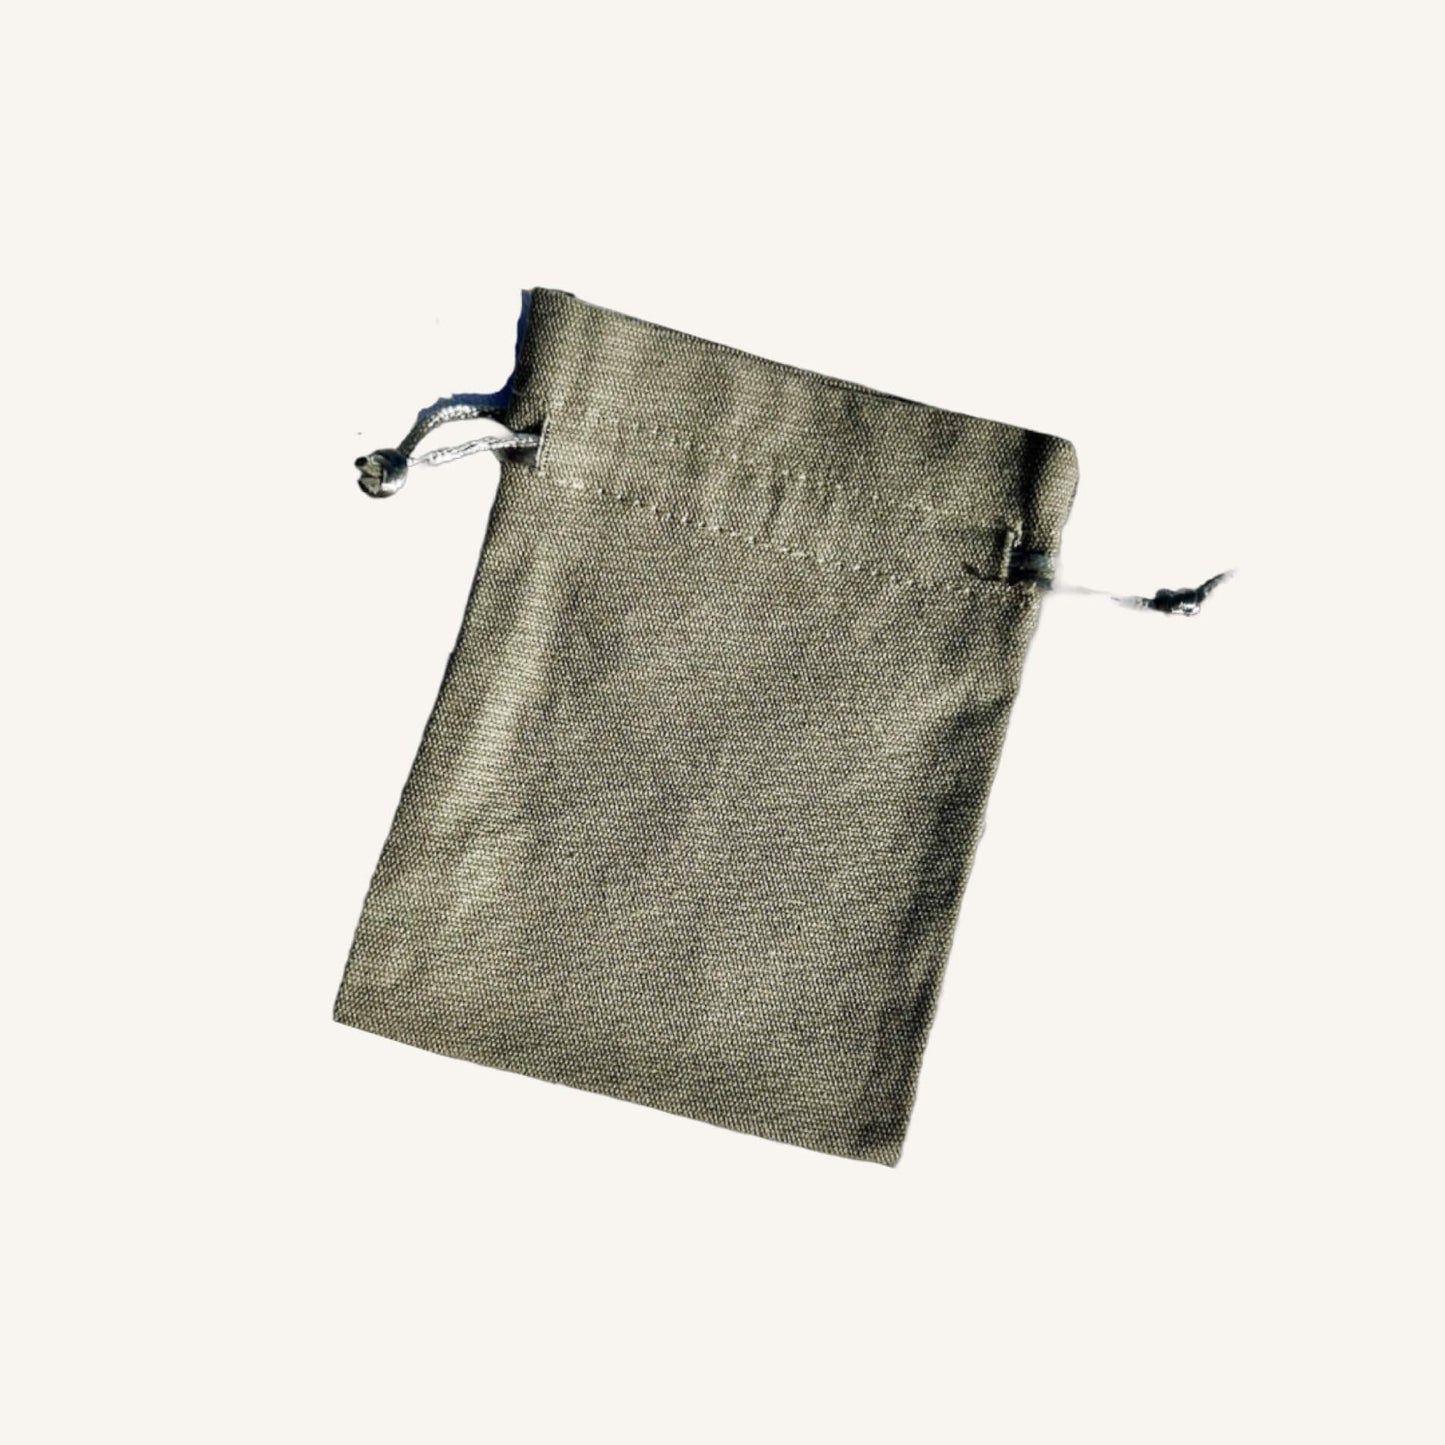 A medium grey recycled cotton gift bag